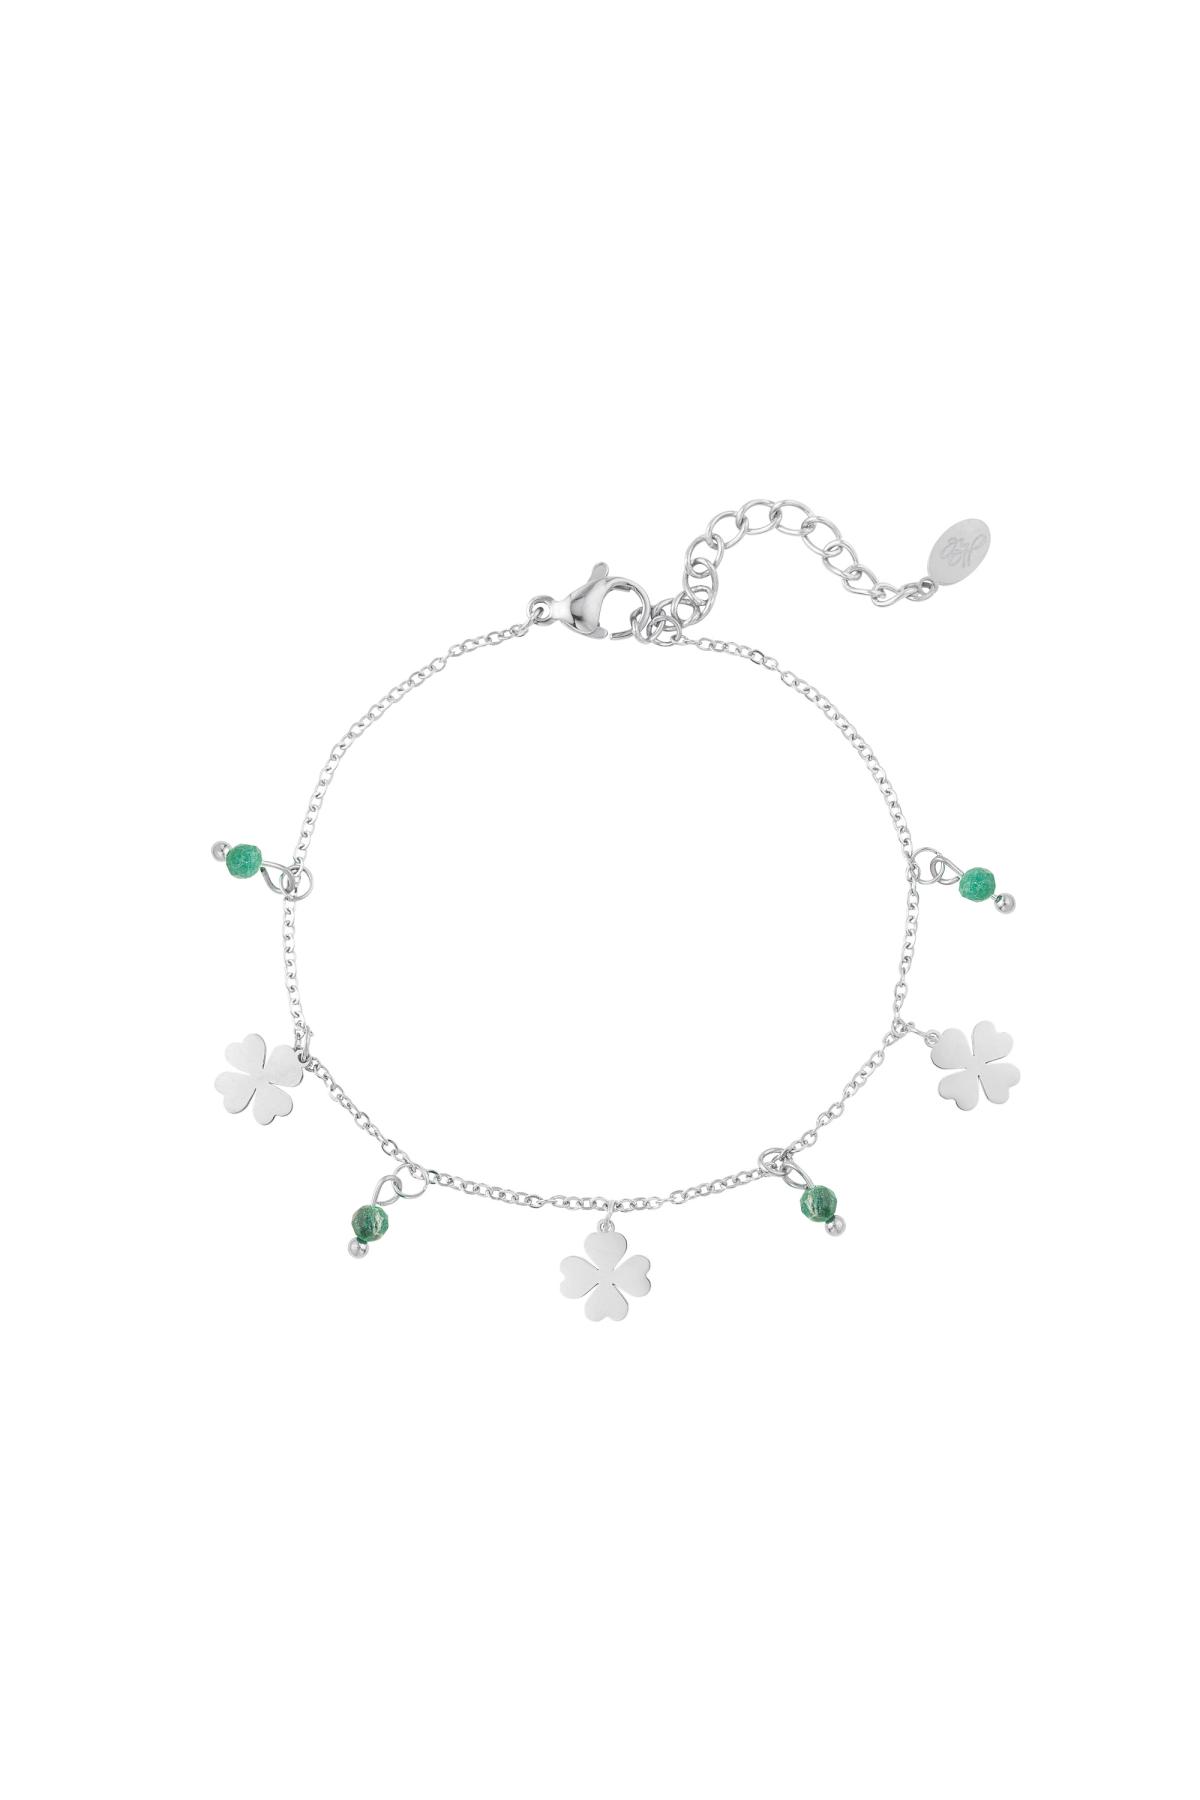 Bracelet four-leaf clovers & stones Silver Stainless Steel h5 